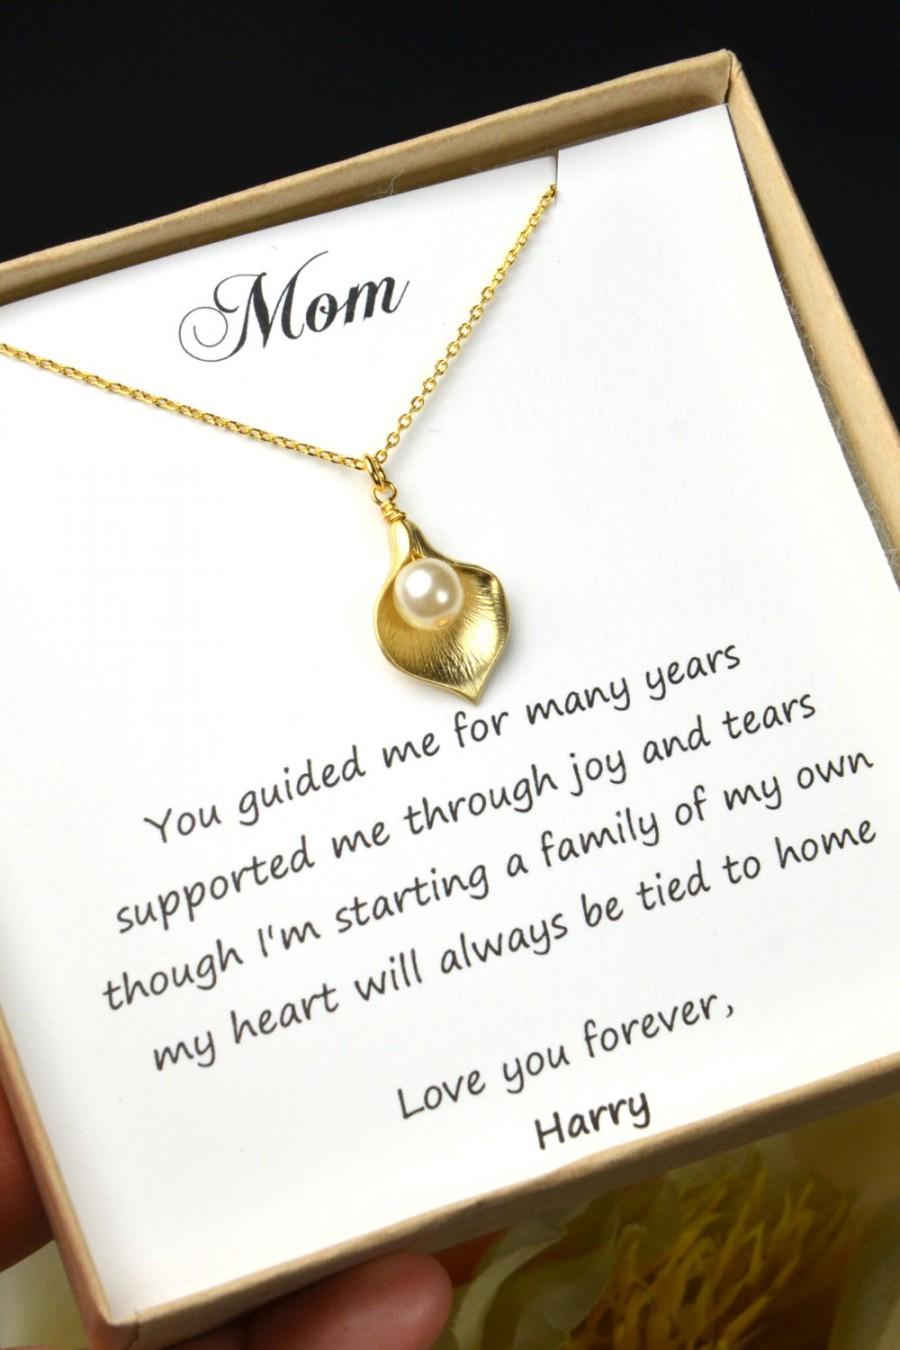 Wedding - Pearl Necklace, Mother of the Groom Gift, Mother of the Bride Gift, Wedding Necklace, Gift for Mom